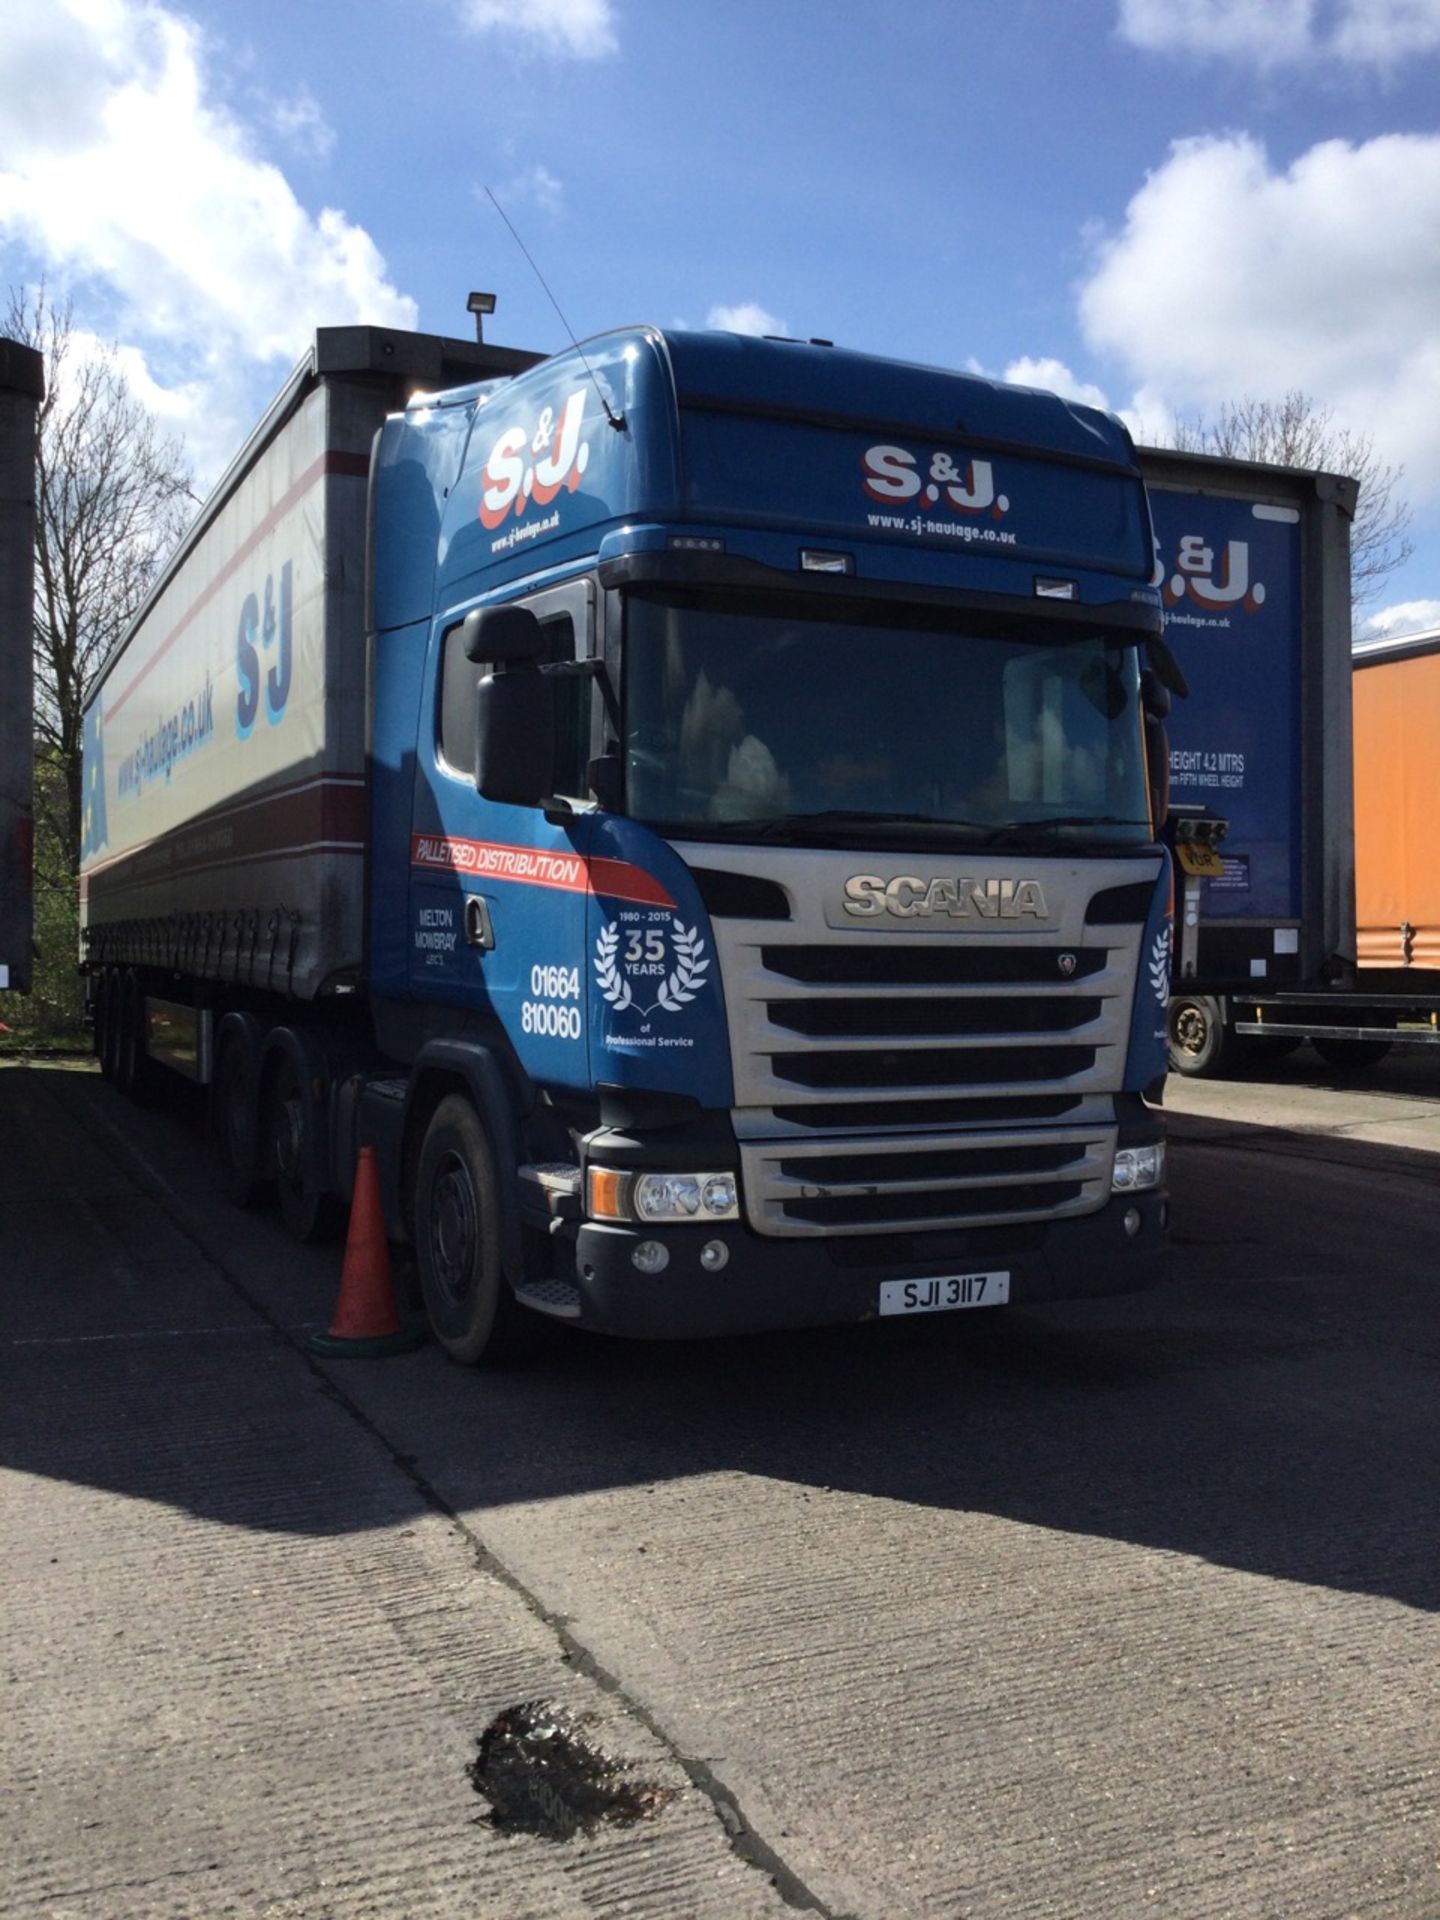 Scania R-SRS L-CLASS 6x2 Tractor Unit With Mid Lift Axle, Sleeper Cab Mot Until 30/06/24Approx 82000